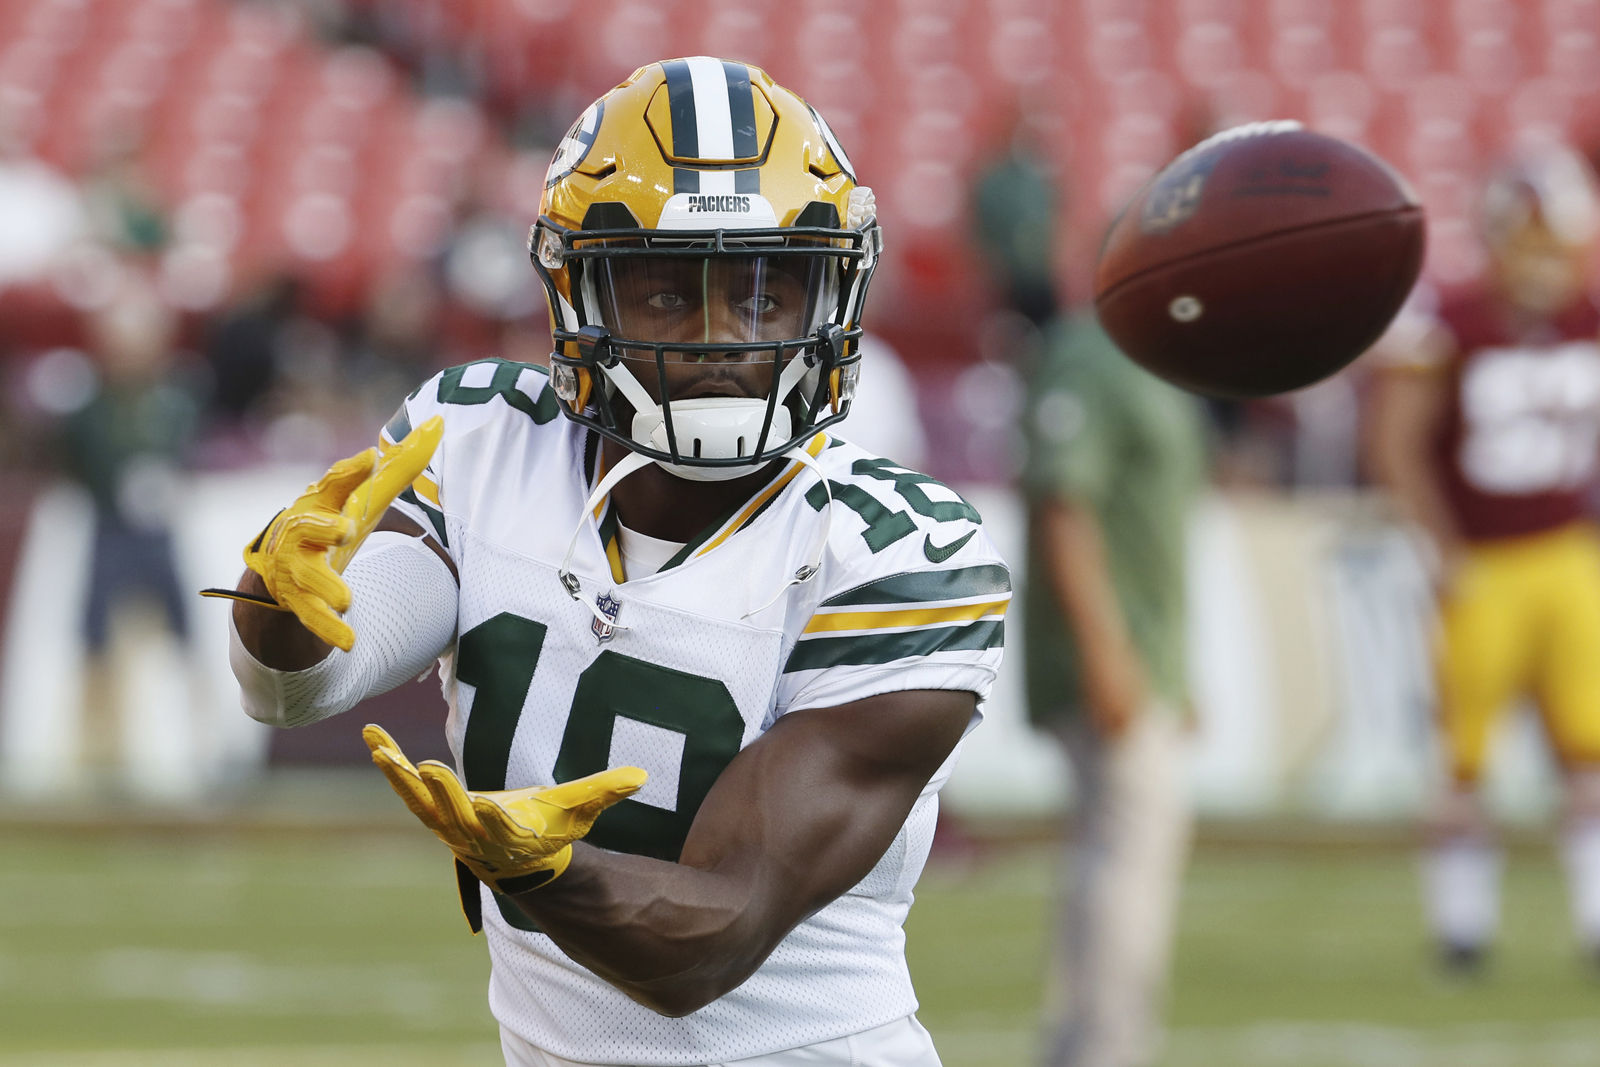 Green Bay Packers wide receiver Randall Cobb (18) warms before an NFL preseason football game against the Washington Redskins in Landover, Md., Saturday, Aug. 19, 2017. (AP Photo/Alex Brandon)